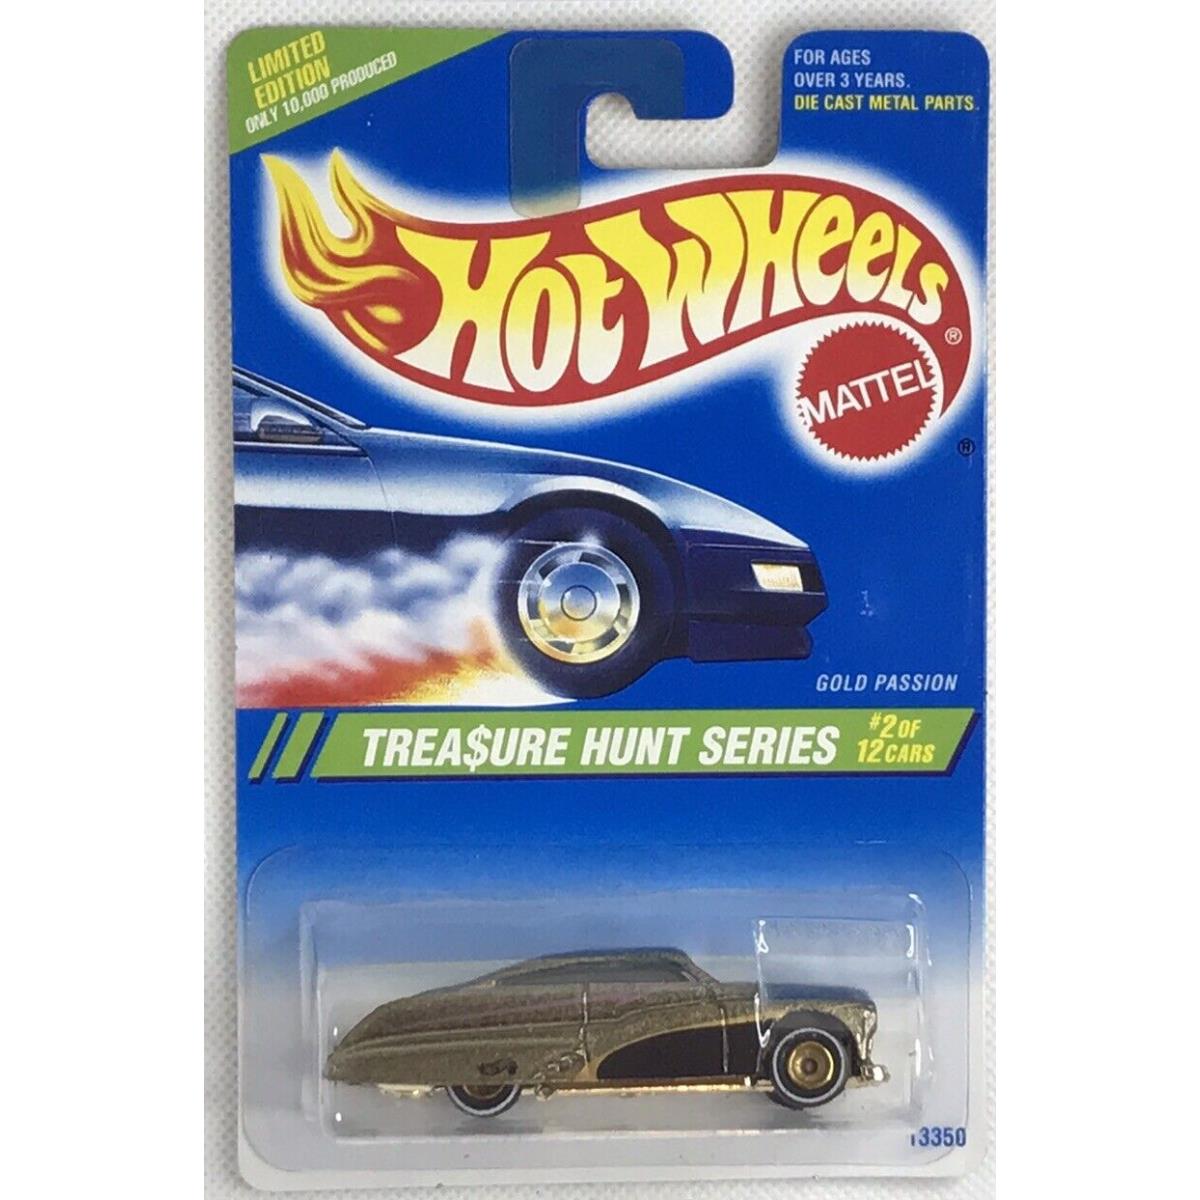 1995 Hot Wheels Treasure Hunt Series Gold Passion Limited Edition 2 Of 12 354